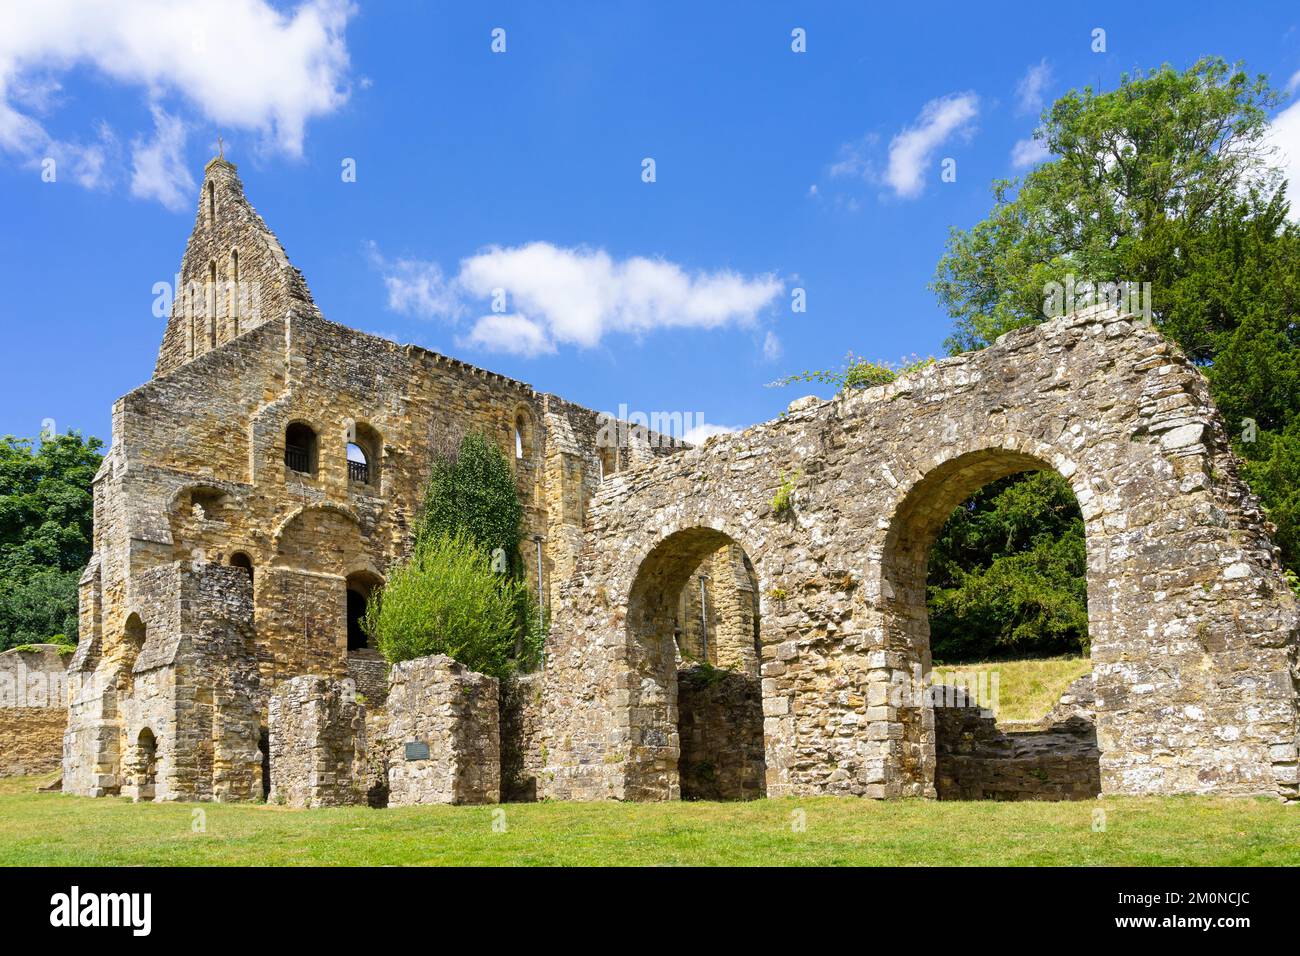 Battle Abbey Battle East Sussex ruins of Battle Abbey monks  dormitory and latrine blocks at Battle Abbey Battle East Sussex England UK GB Europe Stock Photo